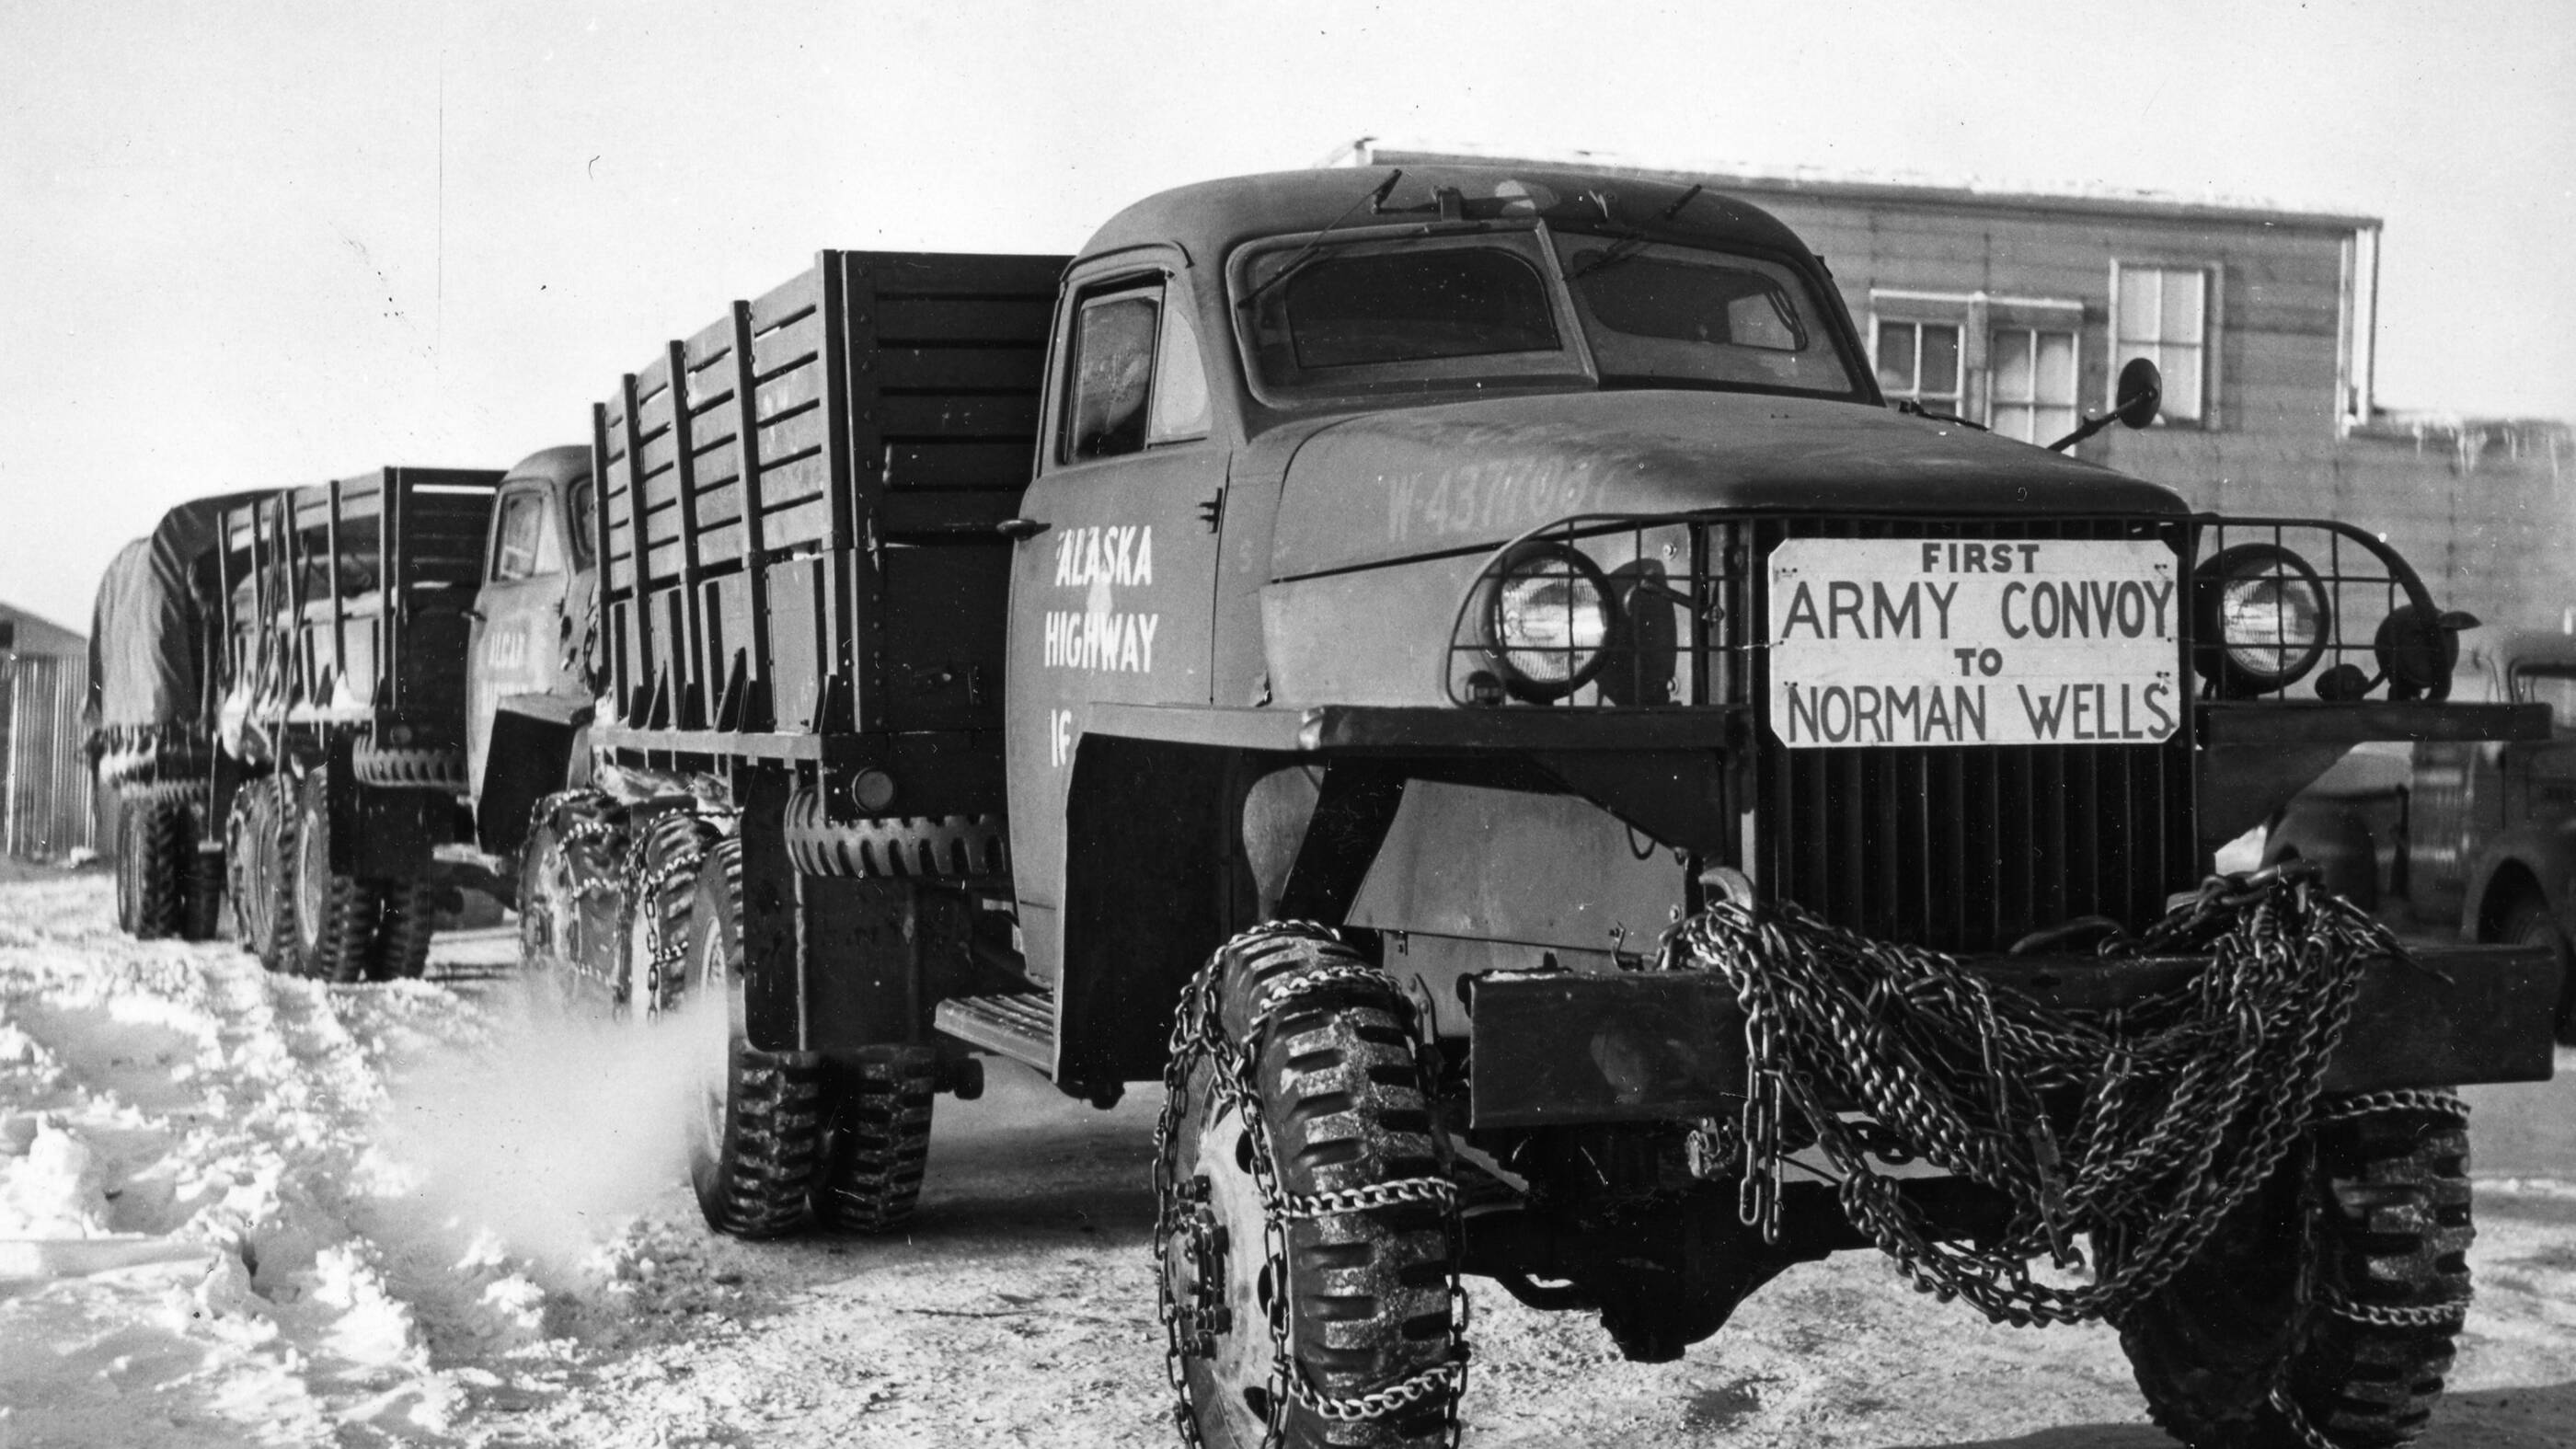 Imperial joins the Canadian and U.S. governments in Canol, a project to provide fuel for the U.S. war effort in the northern Pacific.